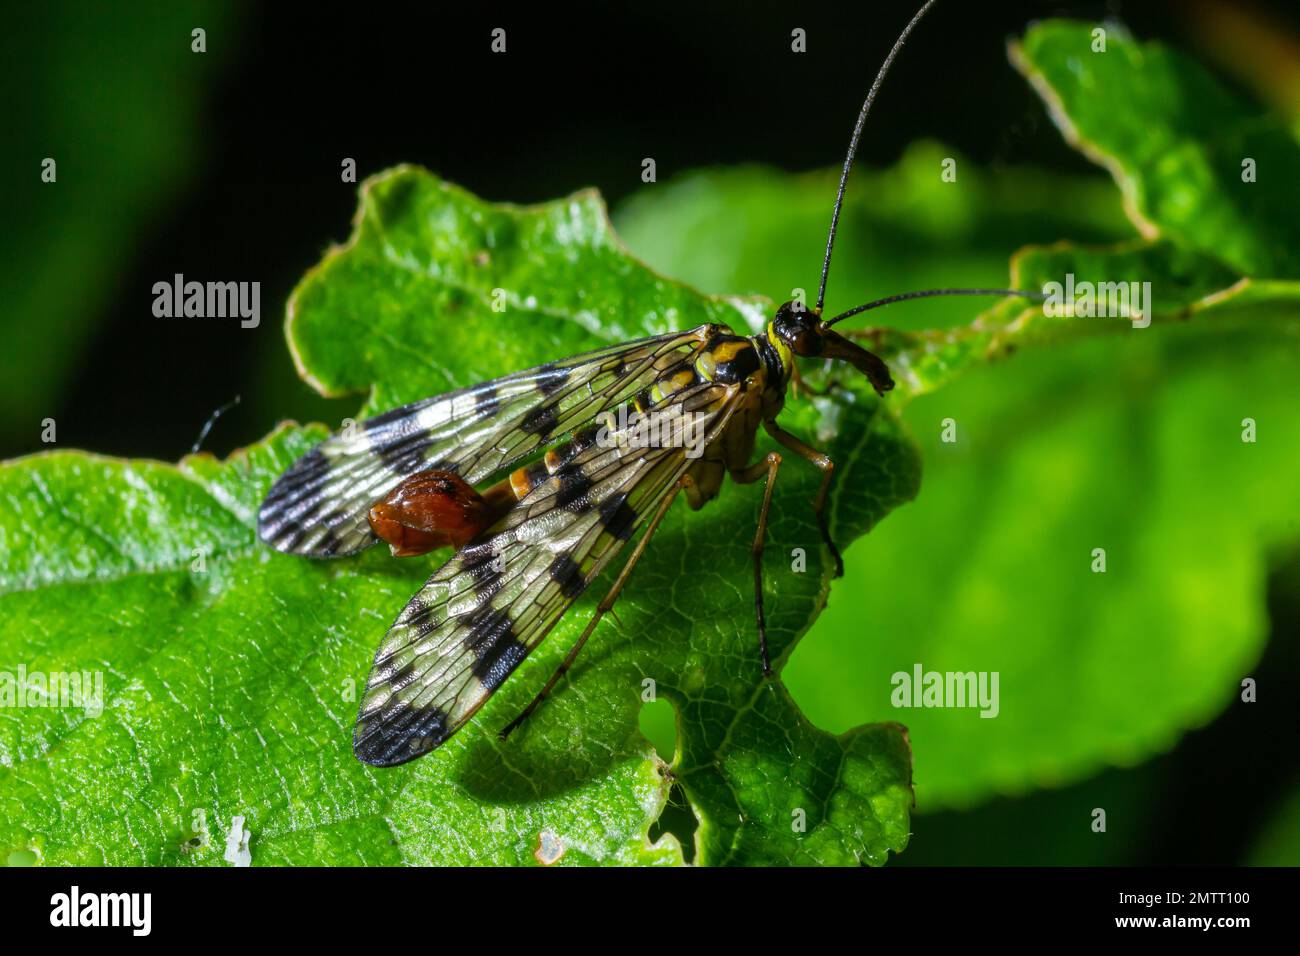 Panorpa communis is the common scorpionfly a species of scorpionfly. Its are useful insects that eat plant pests. Stock Photo